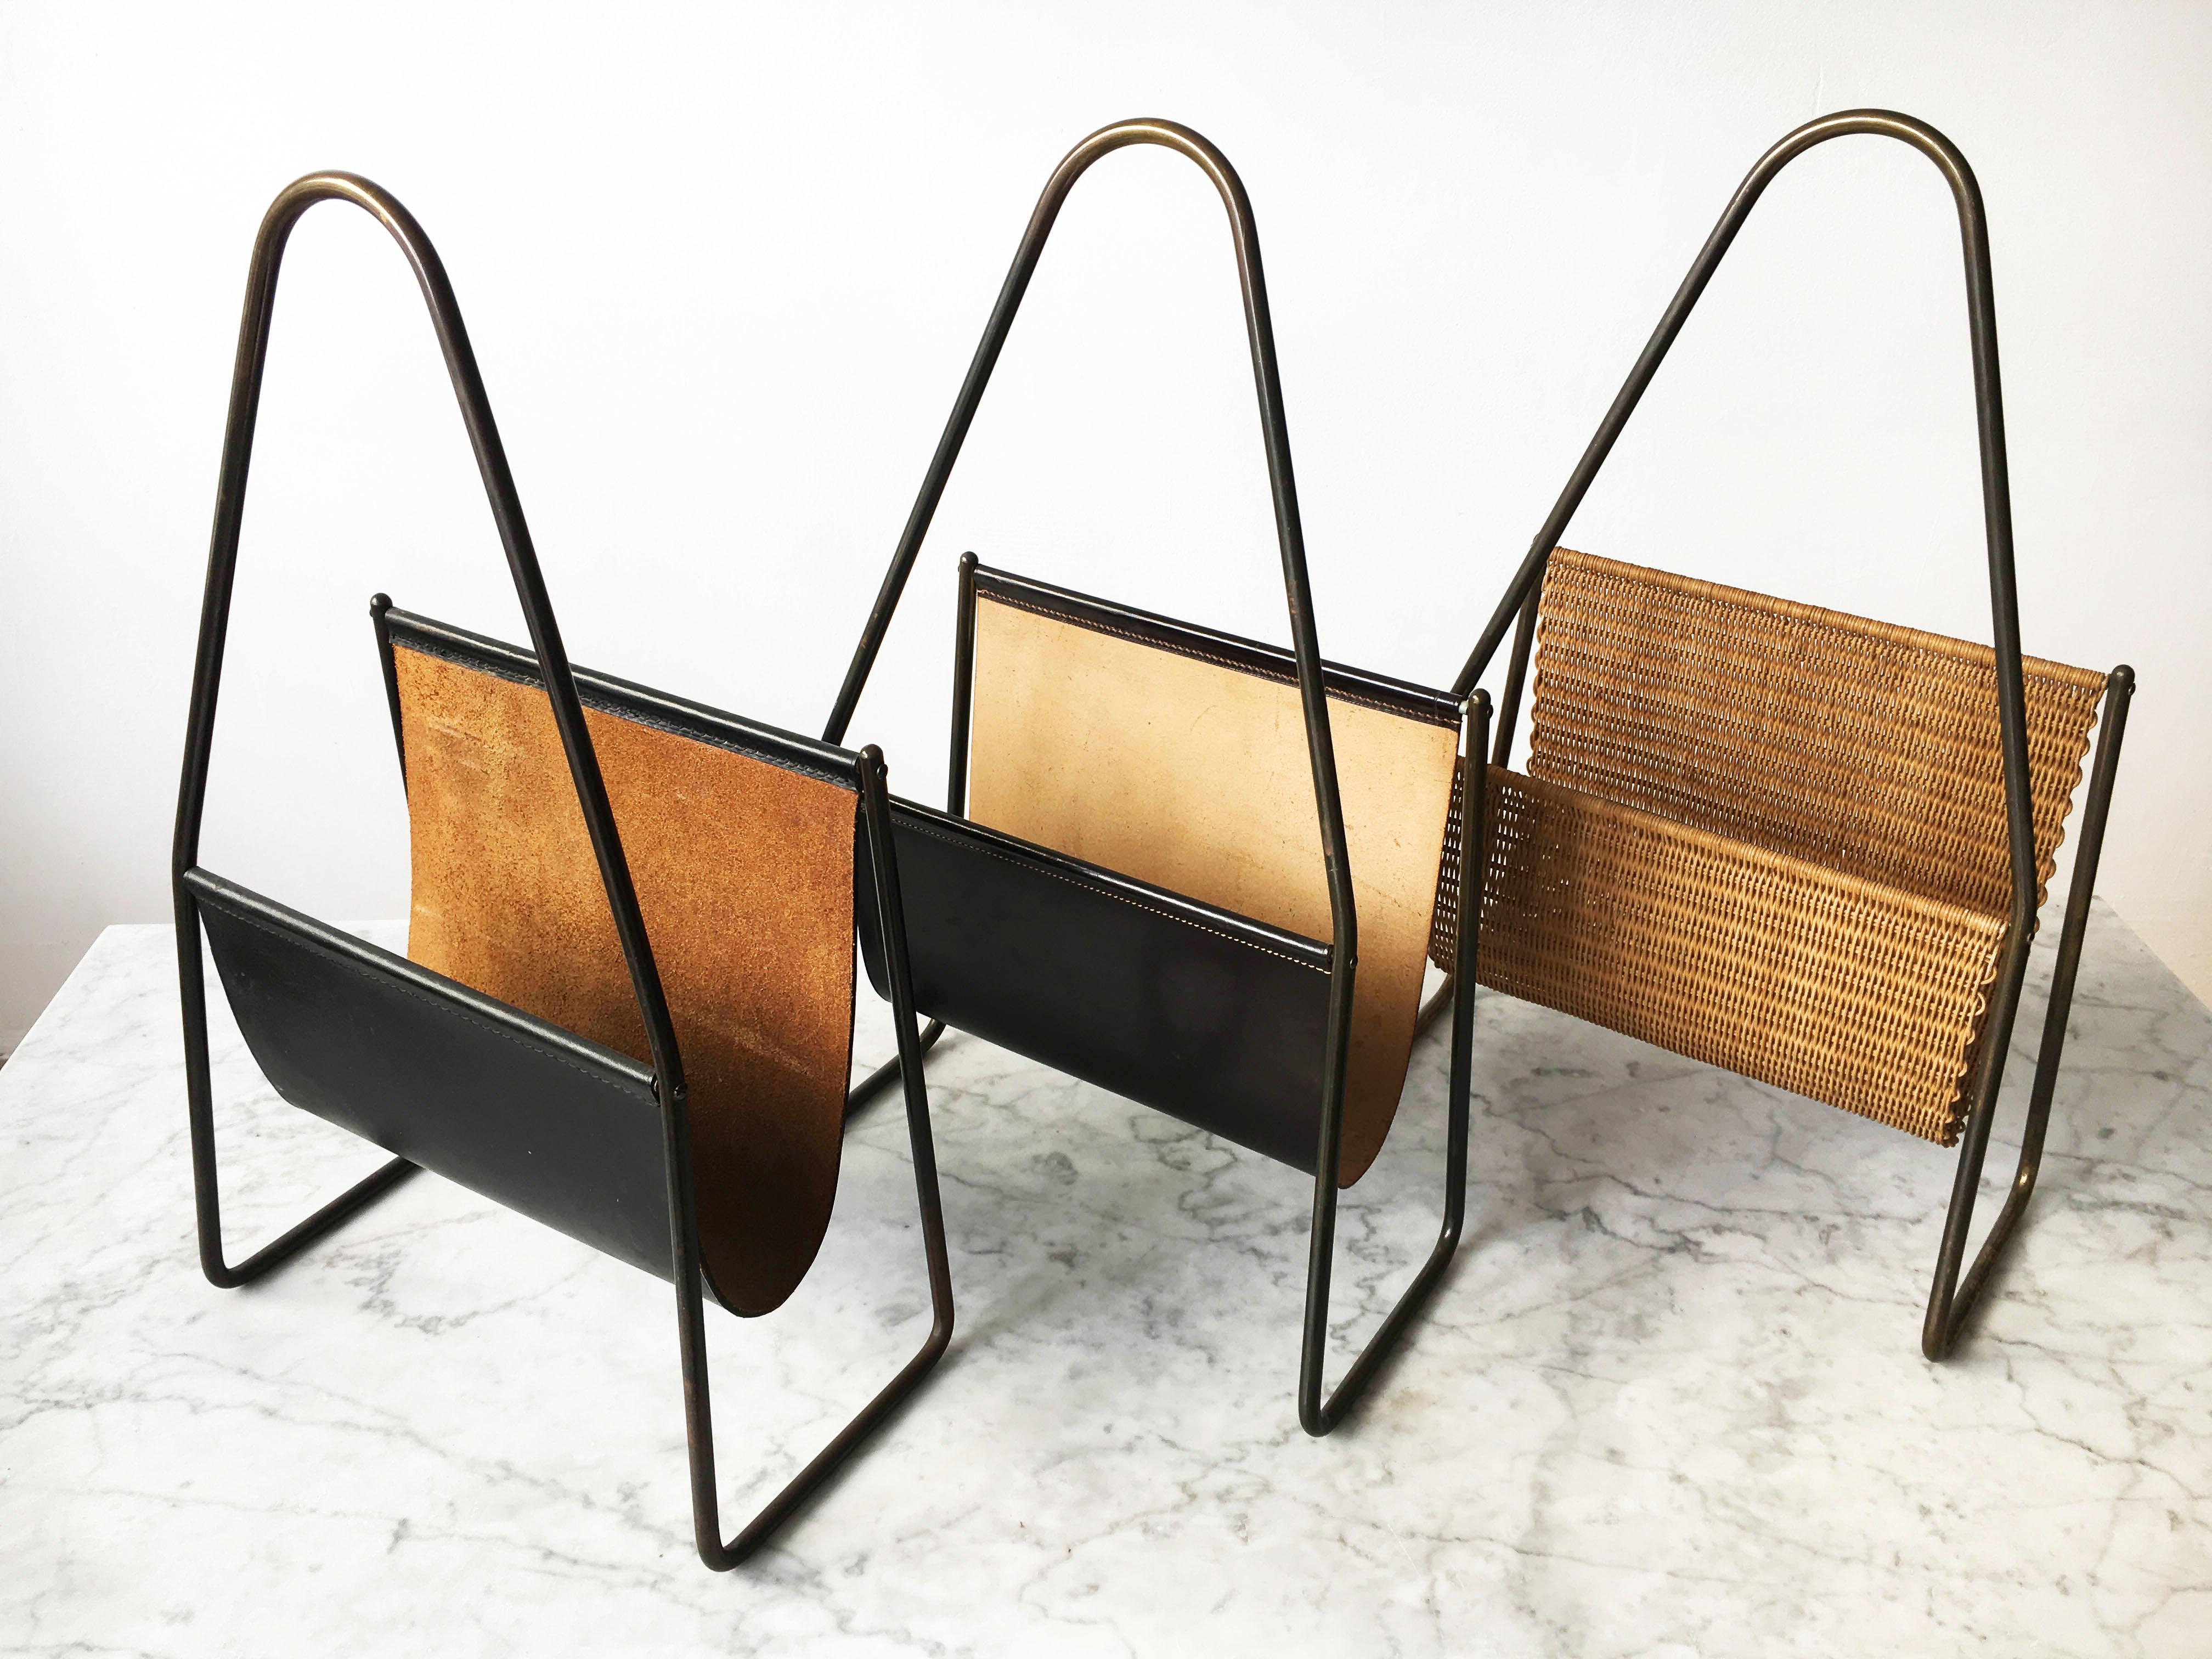 Carl Auböck II Vintage Magazine Stand Collection Group of Three, Austria, 1950s For Sale 2